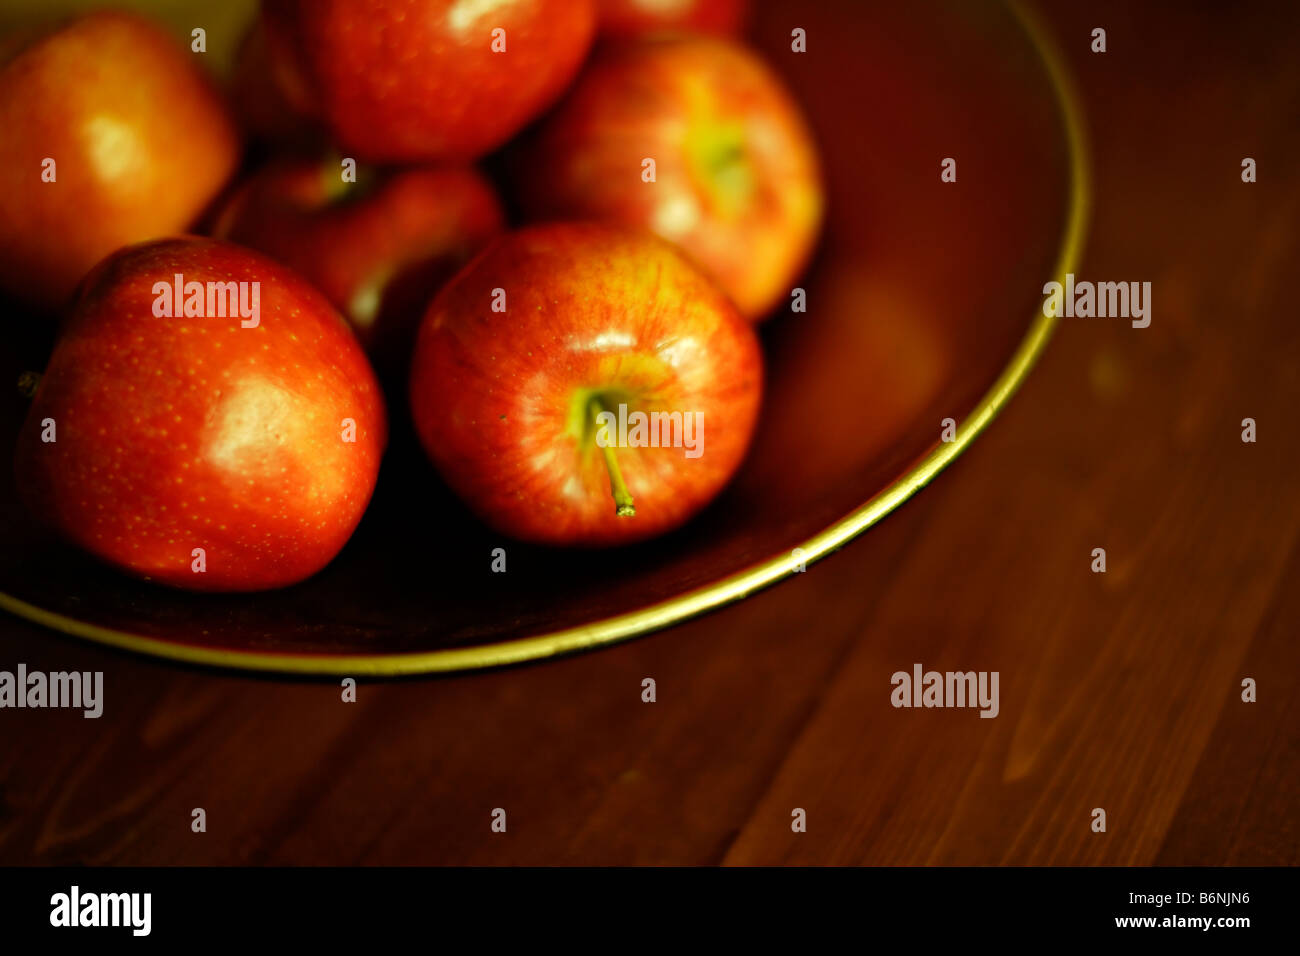 Bowl of apples on table Stock Photo